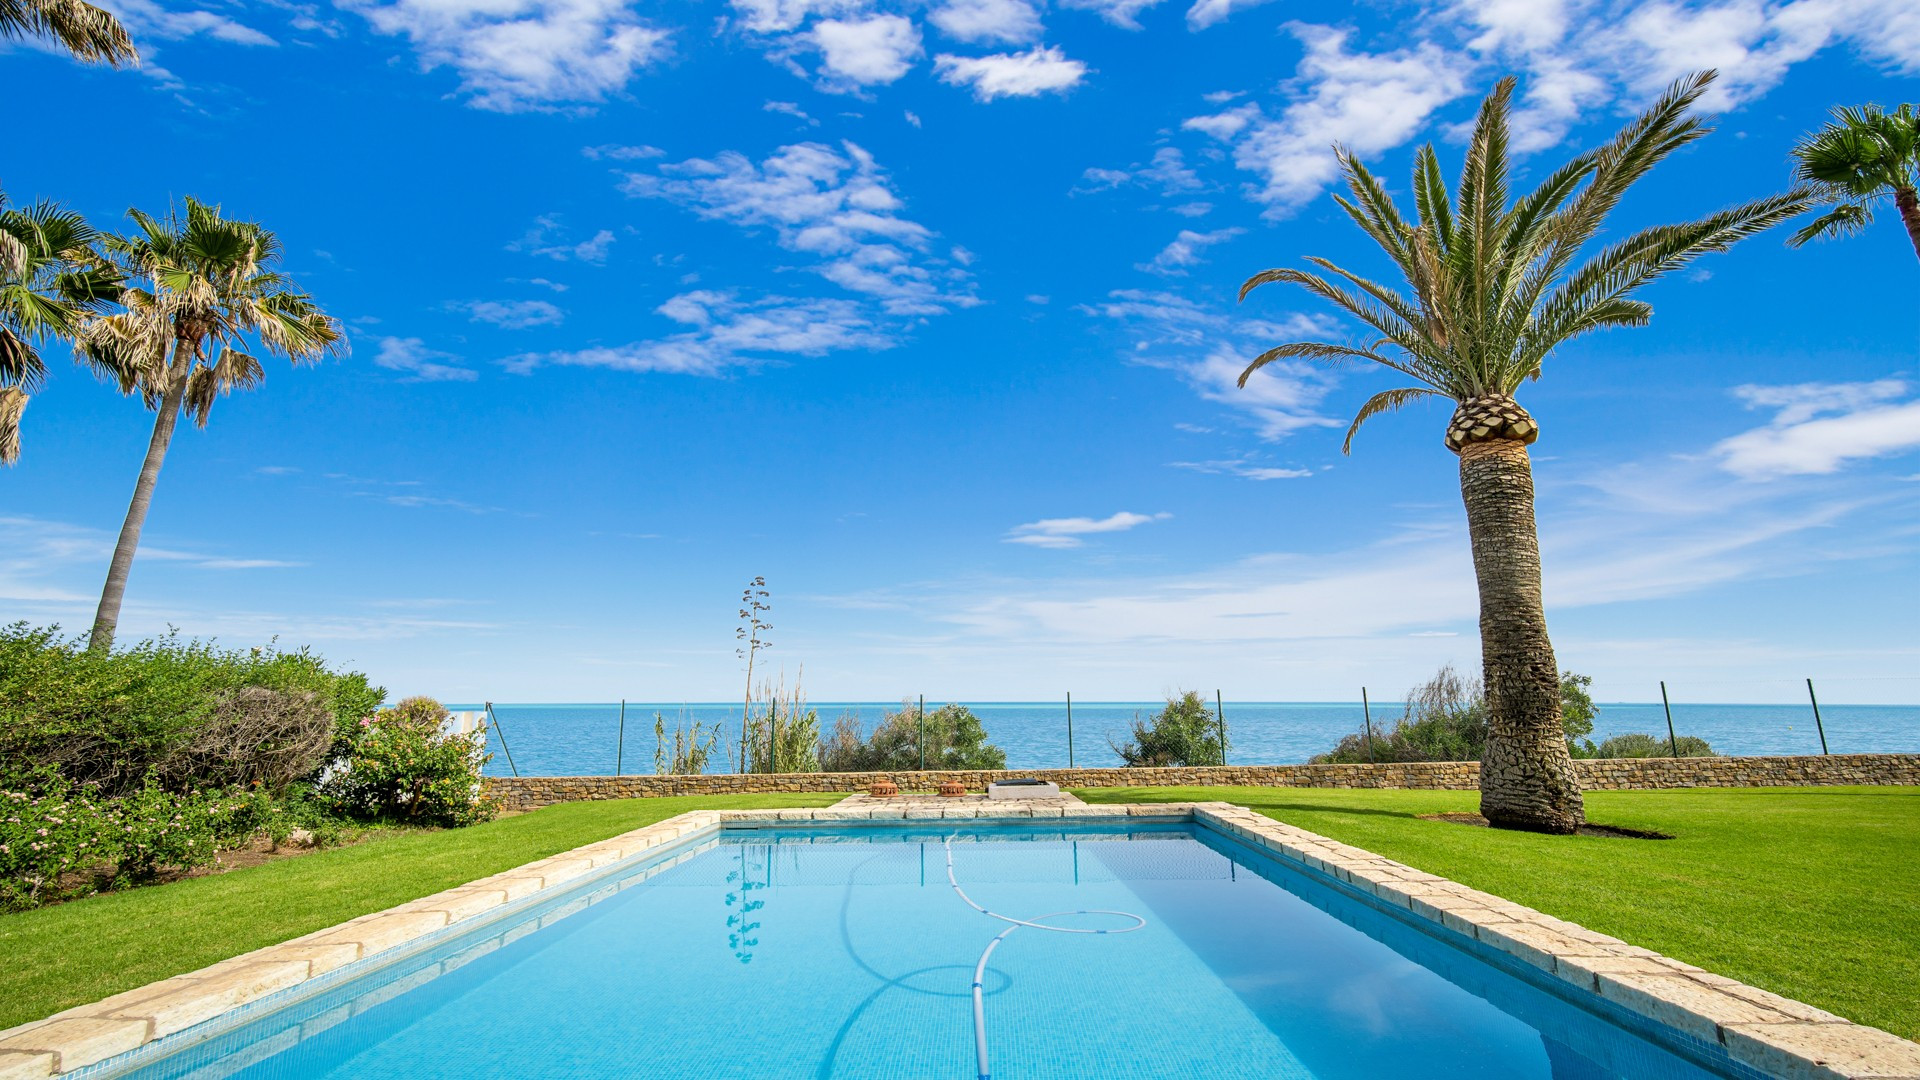 Frontline beach classical style villa with direct access to the beach and the Estepona promenade very private and quiet in a small gated community